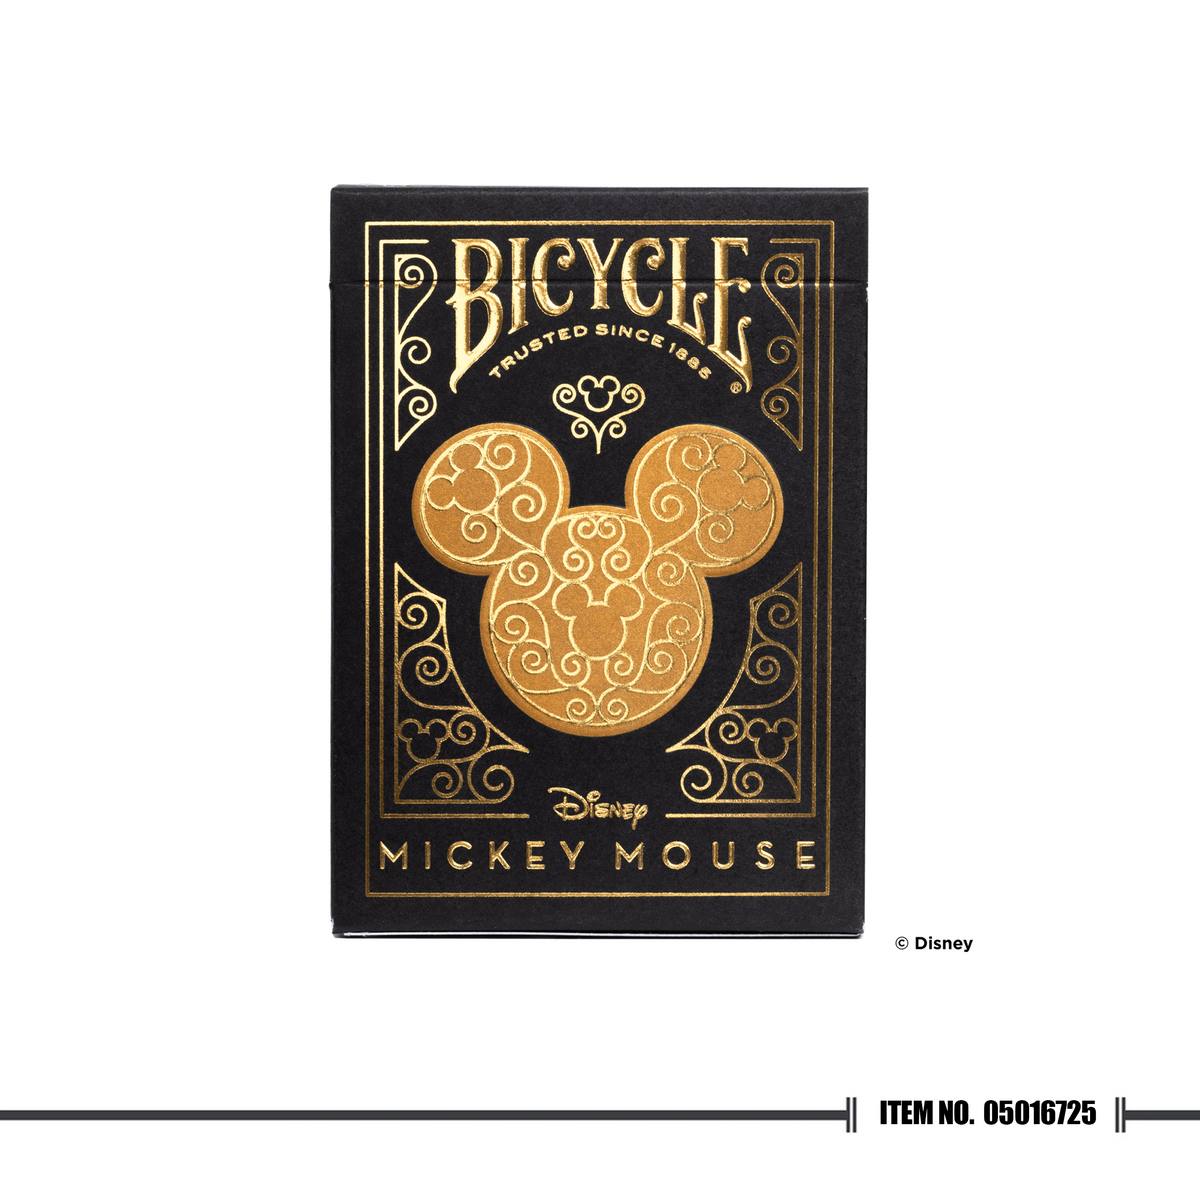 Disney Mickey Mouse inspired Black and Gold Playing Cards by Bicycle ...